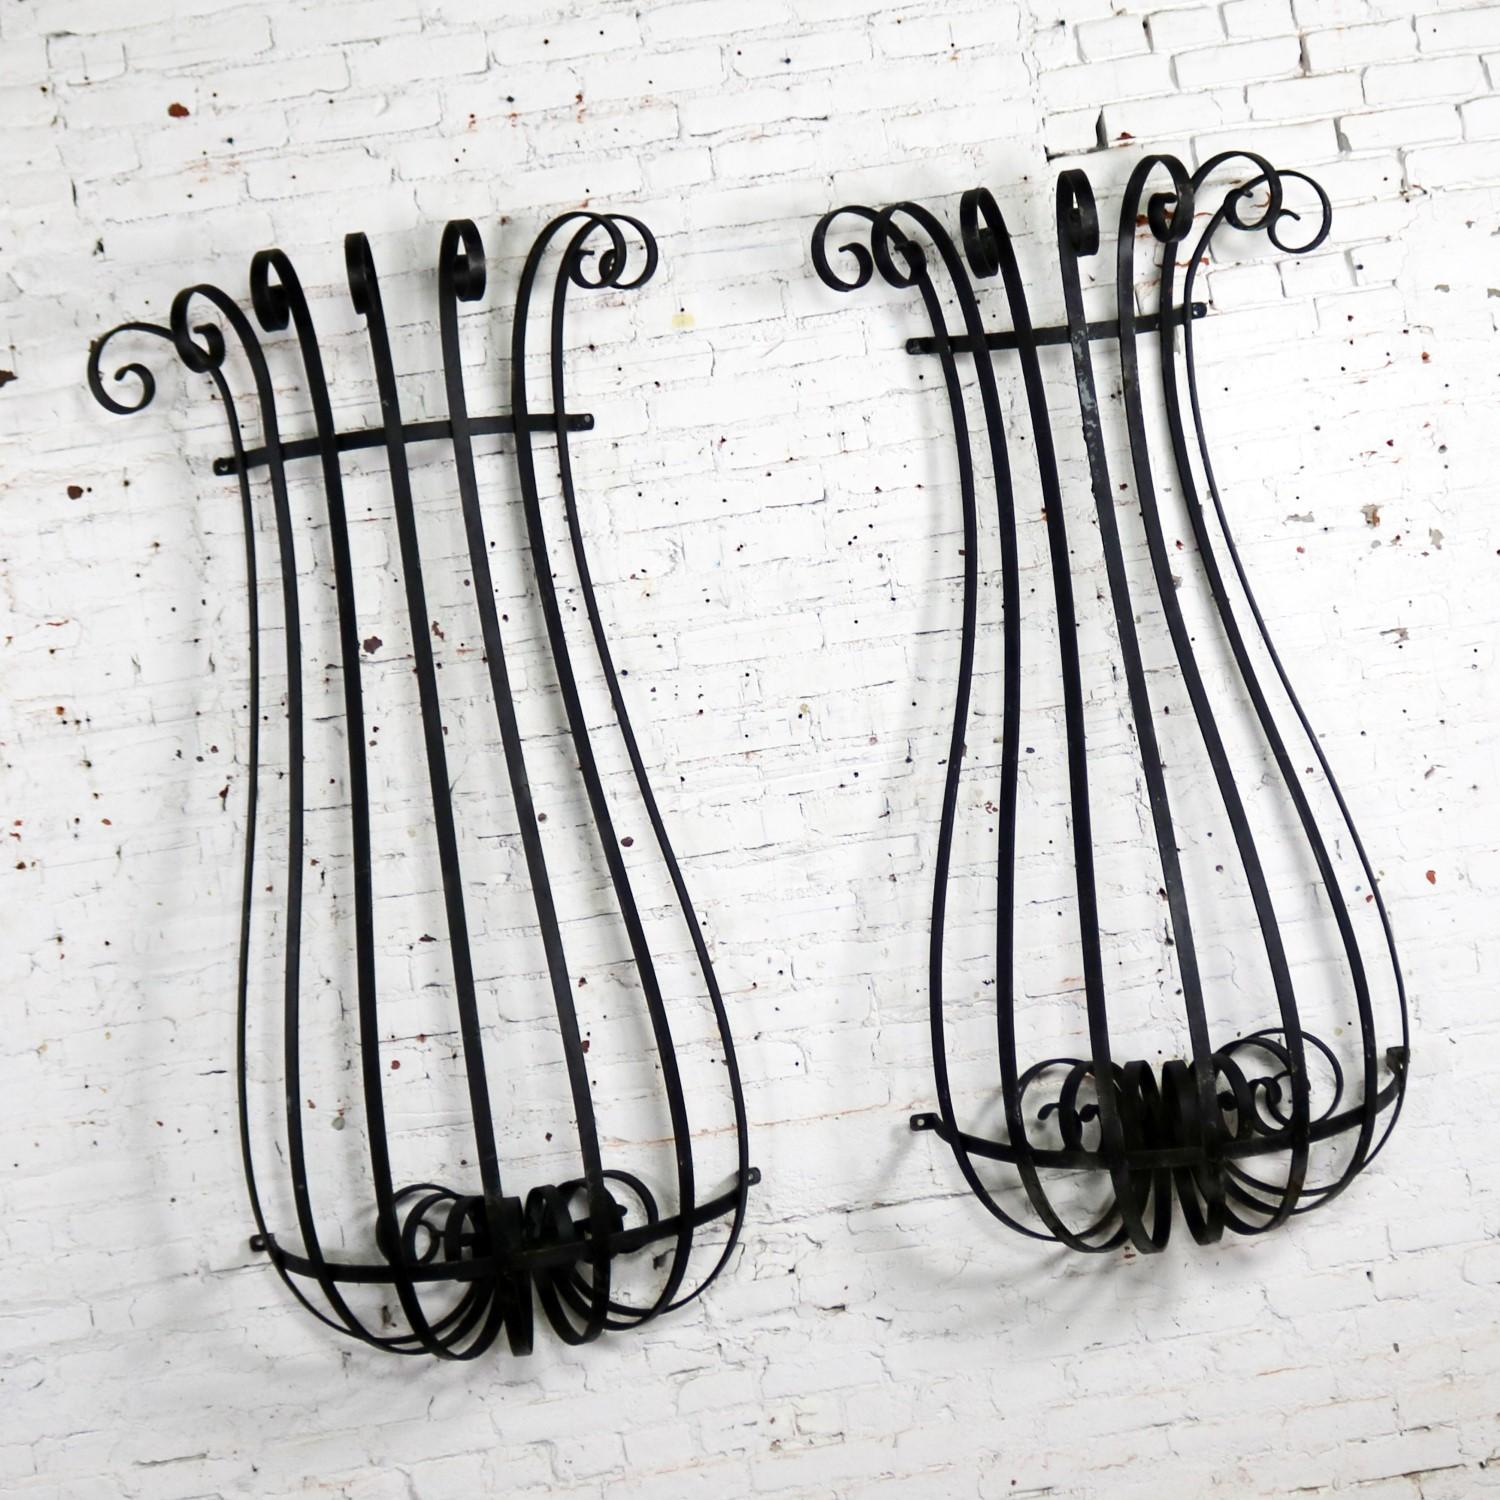 Fabulous architectural antique hand-wrought iron window guards. Or, they could/can be wall urn planters window boxes. They are in wonderful antique condition with nice age patina. Priced for the pair, circa 1920s-1970s.

Wow! These architectural